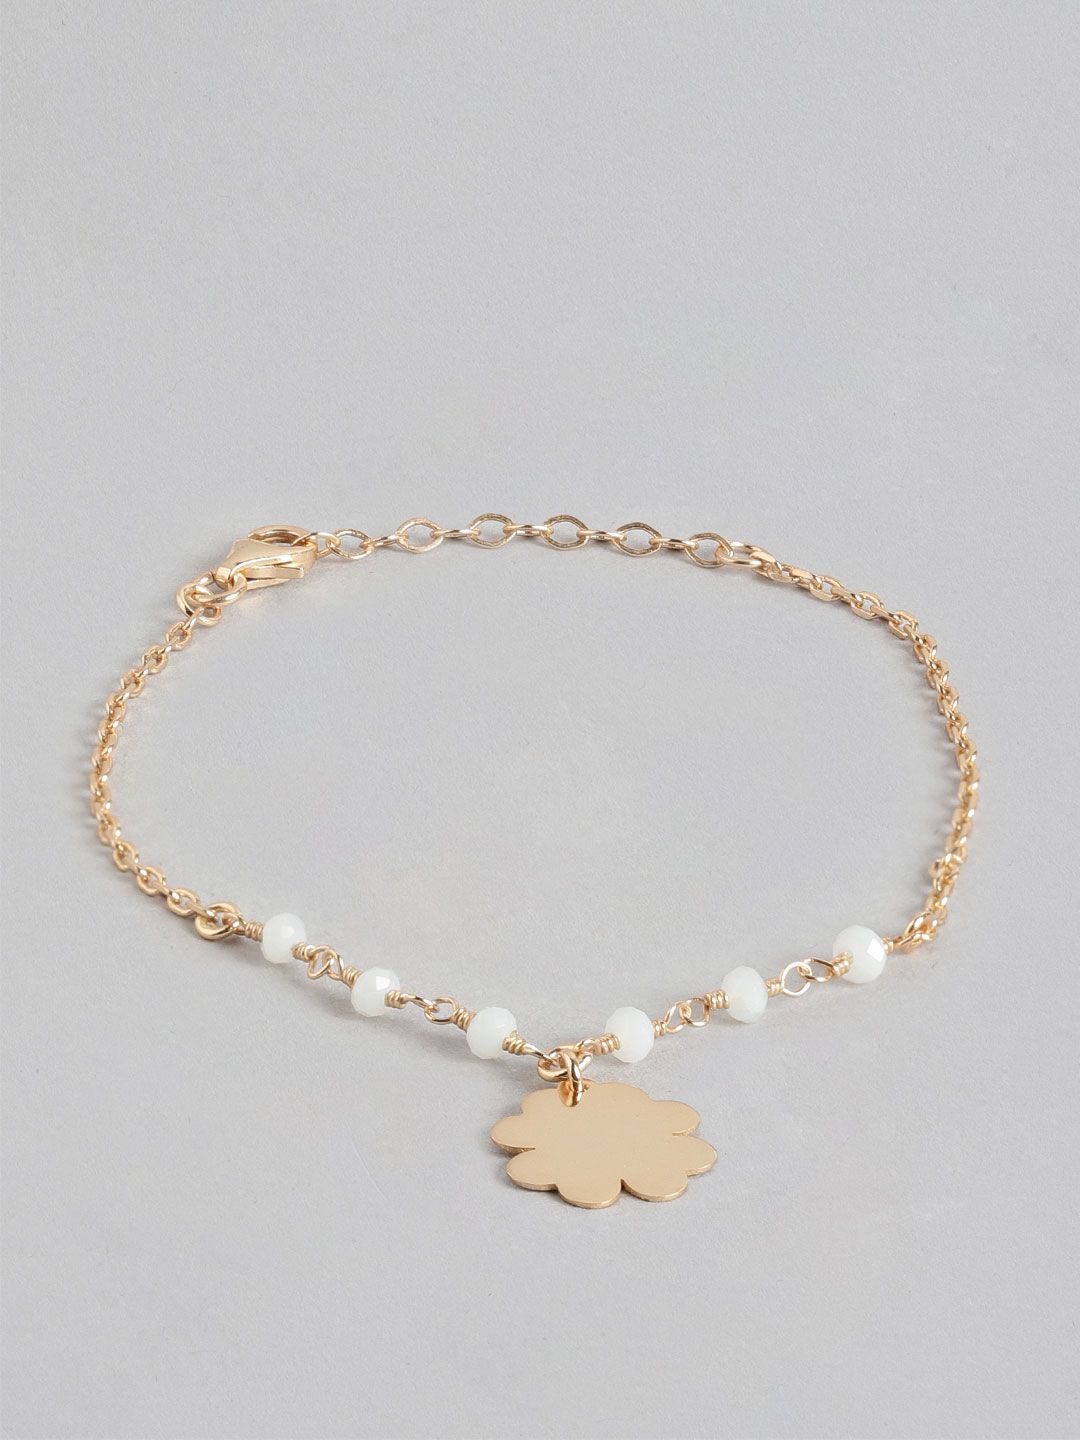 Carlton London Women Gold-Toned & White Brass Gold-Plated Charm Bracelet Price in India